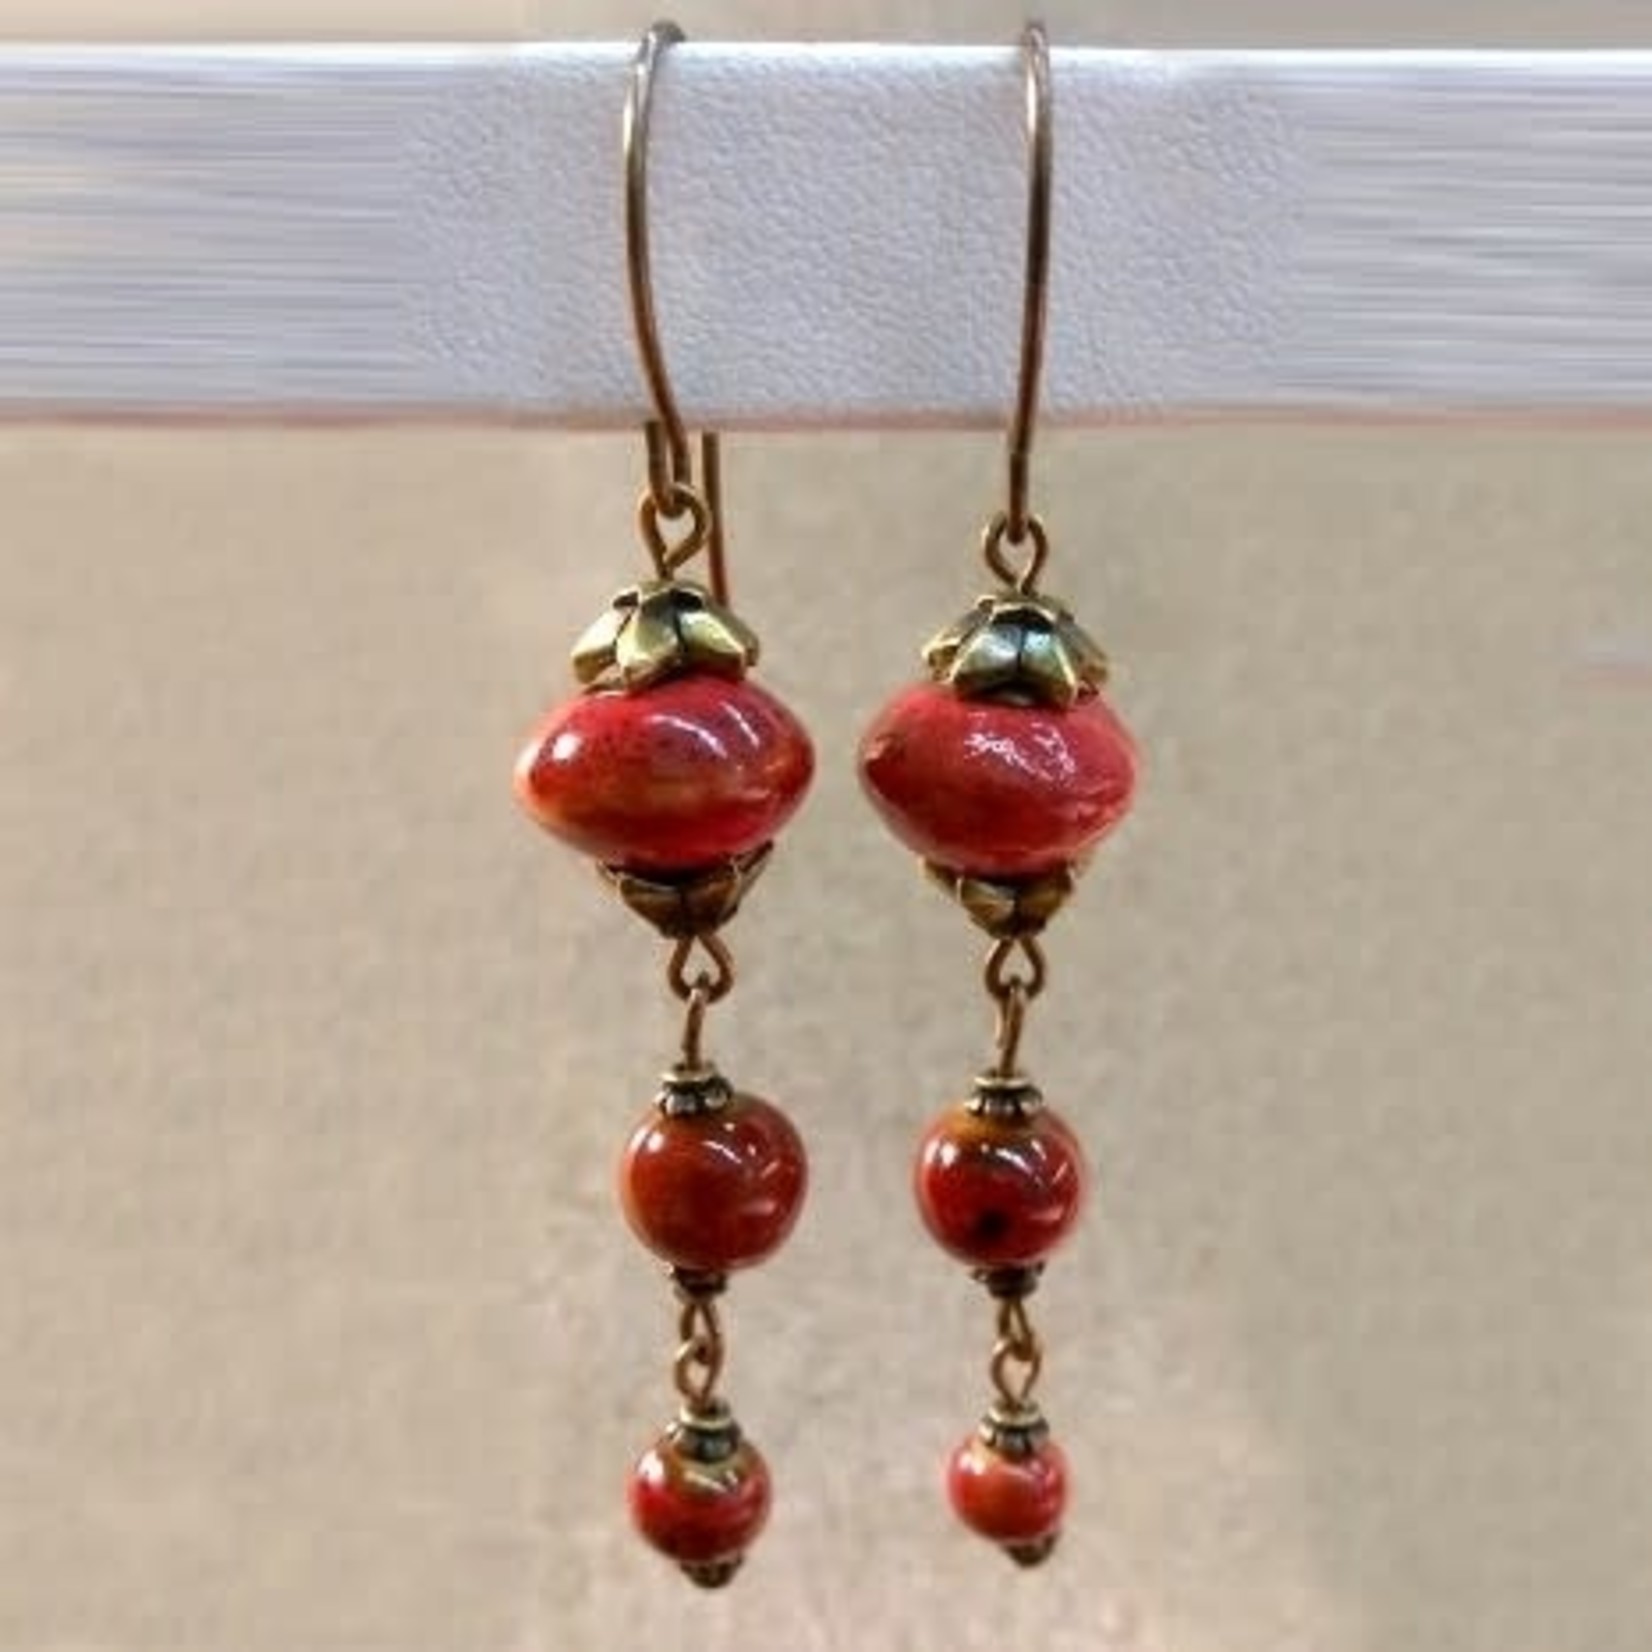 Bead Inspirations Triple Passion Earrings